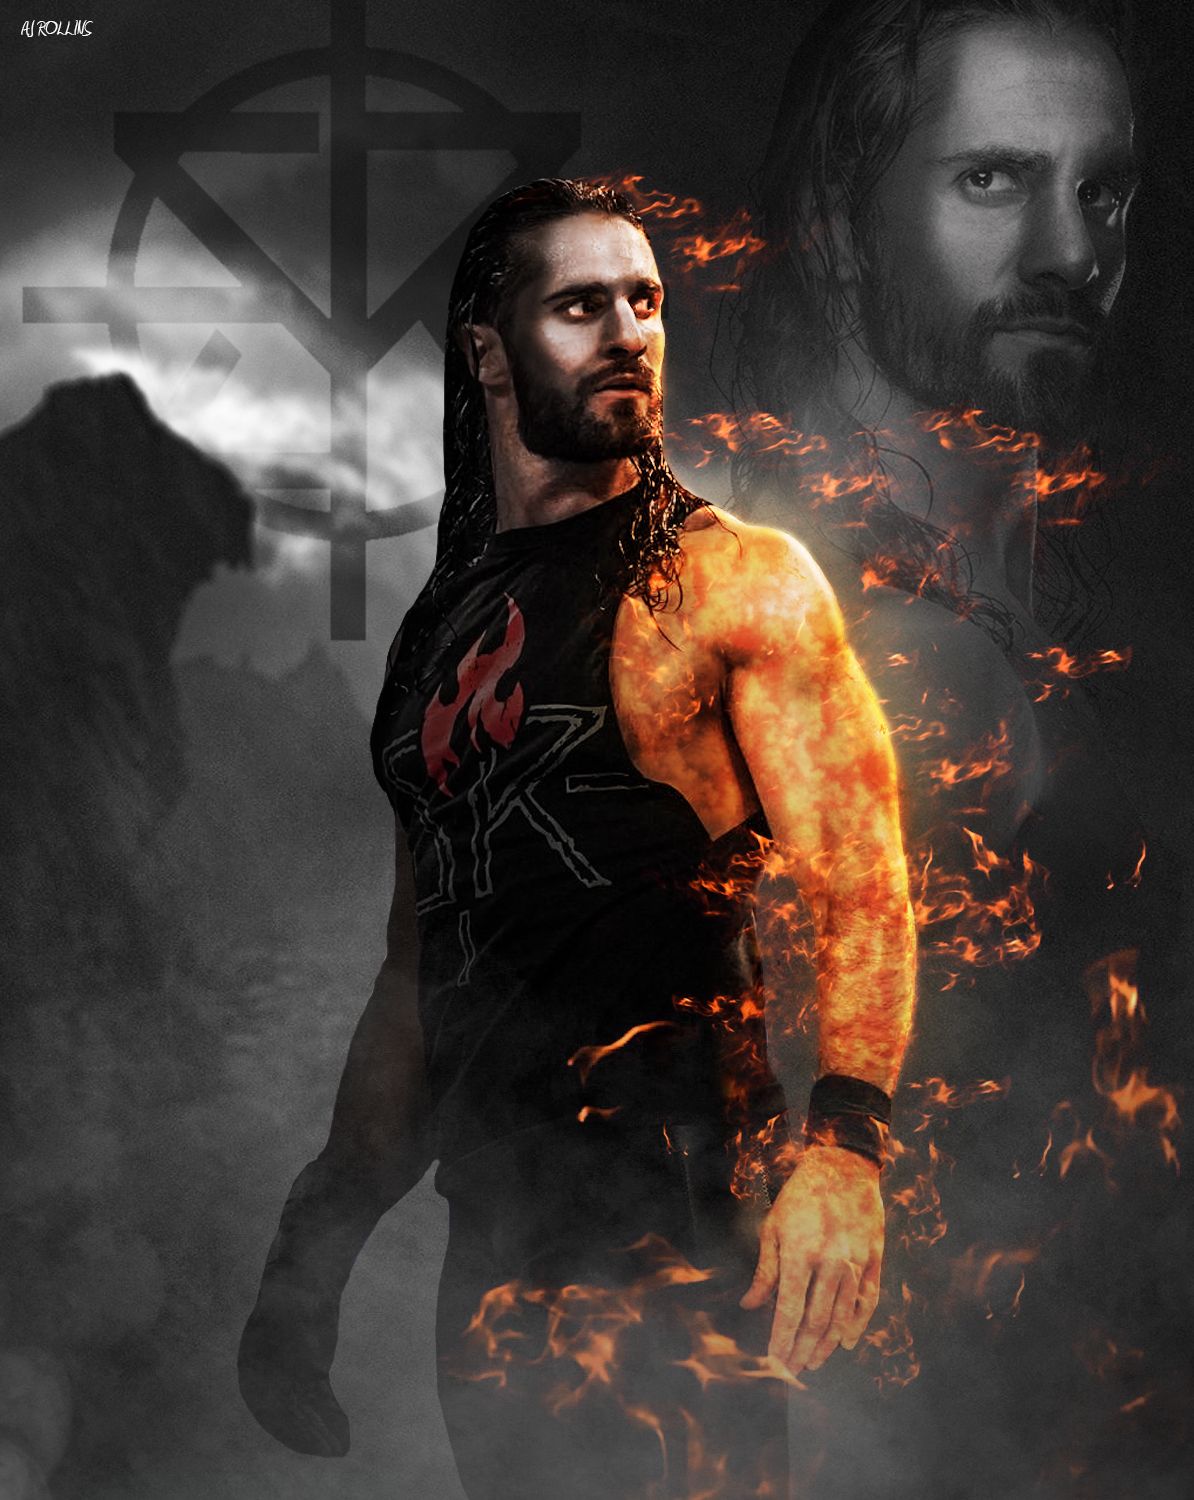 2048x1152 / 2048x1152 seth rollins wallpaper hd - Coolwallpapers.me!